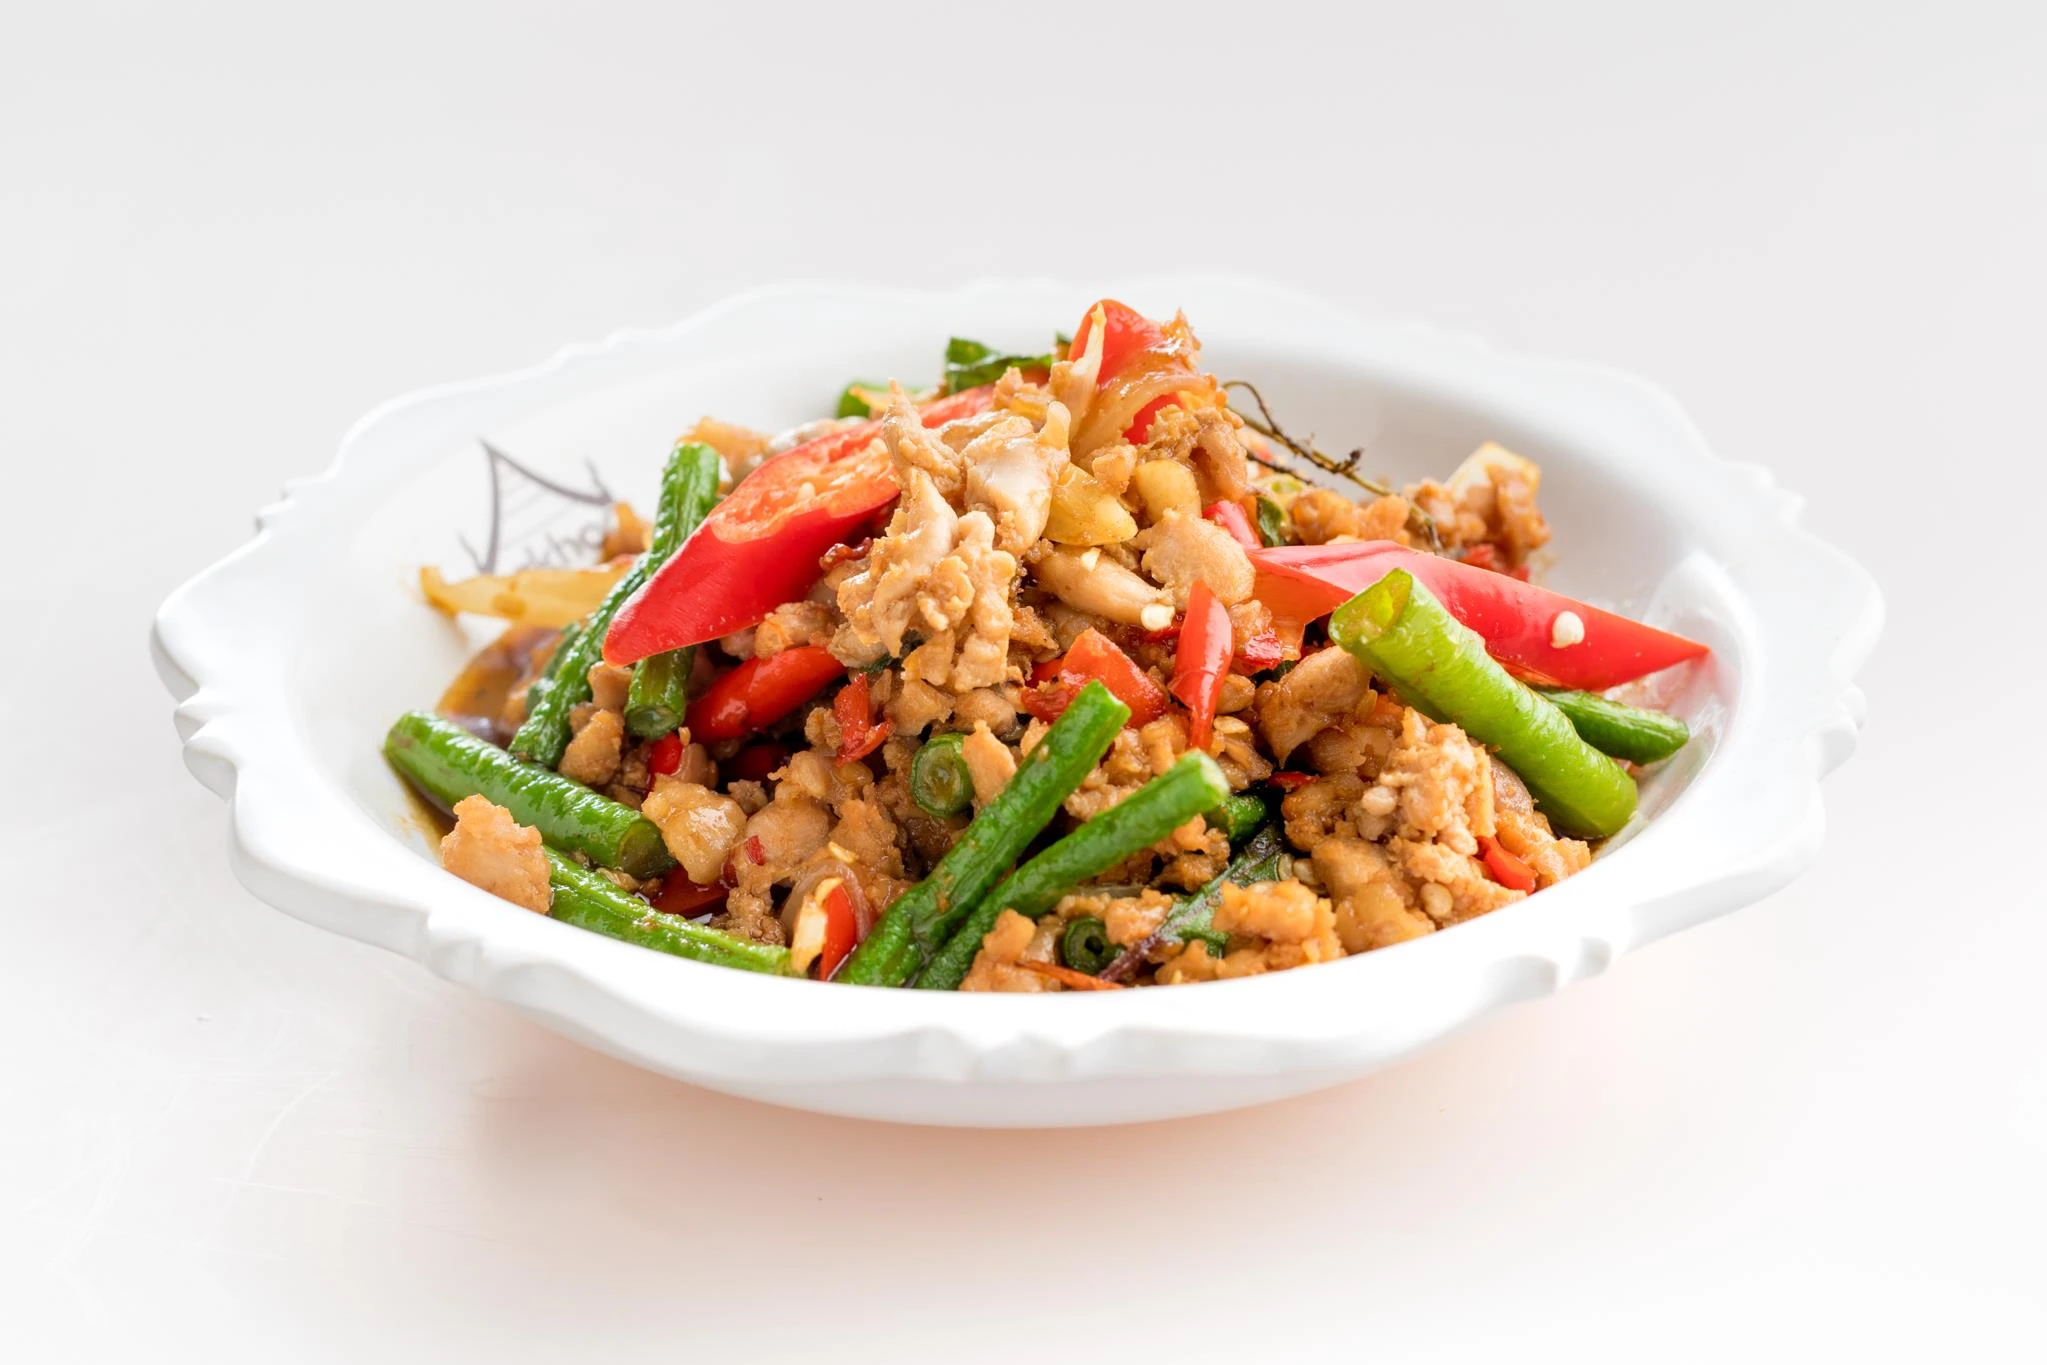 Stir-fried minced chicken with hot basil leaves